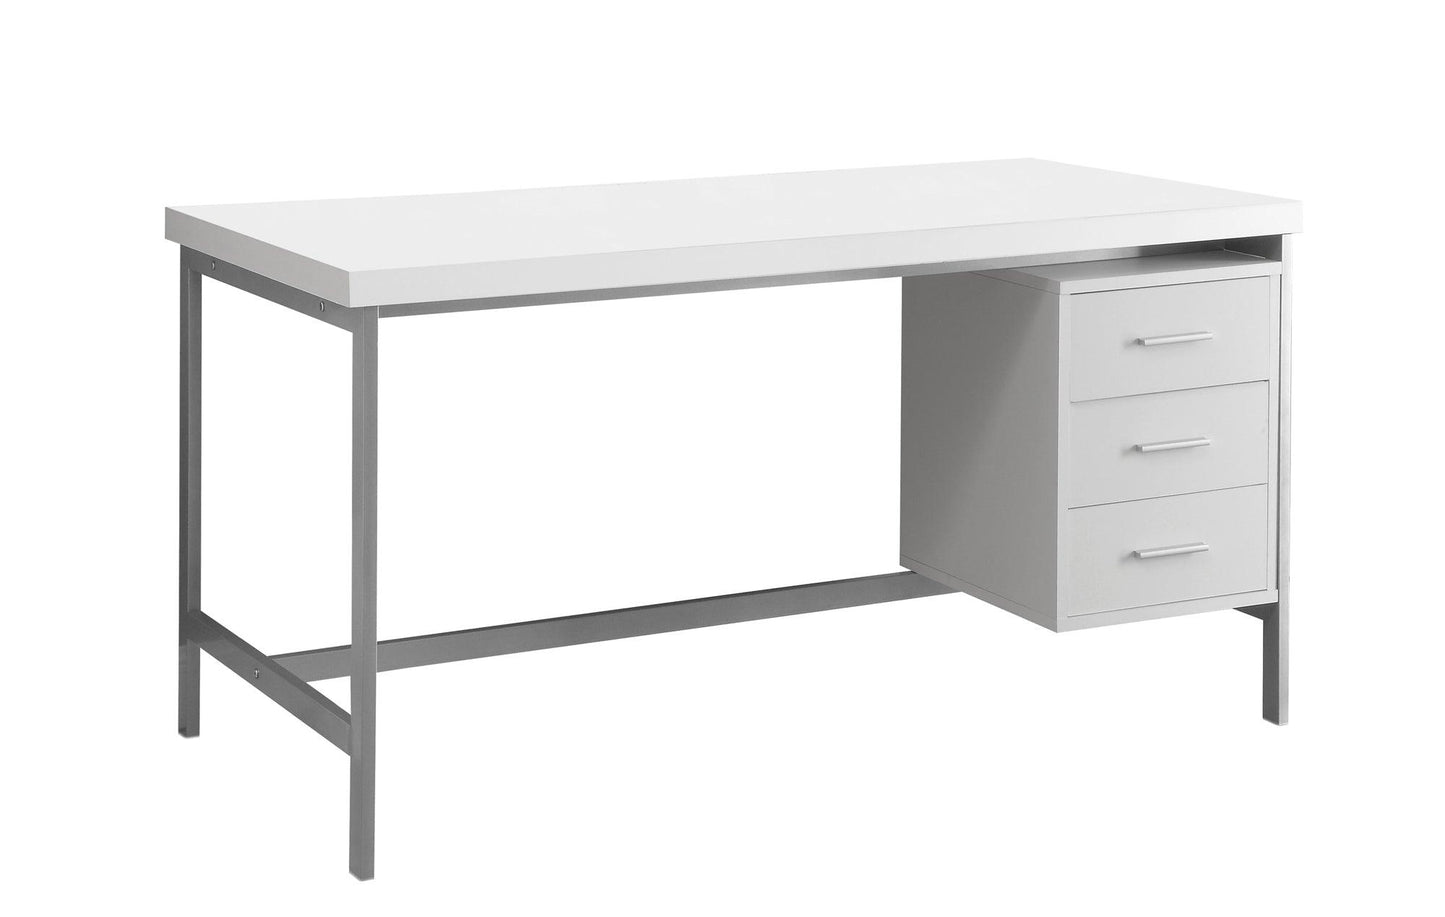 30" x 60" x 31" White Silver Particle Board Hollow Core Metal Computer Desk With A Hollow Core - AFS